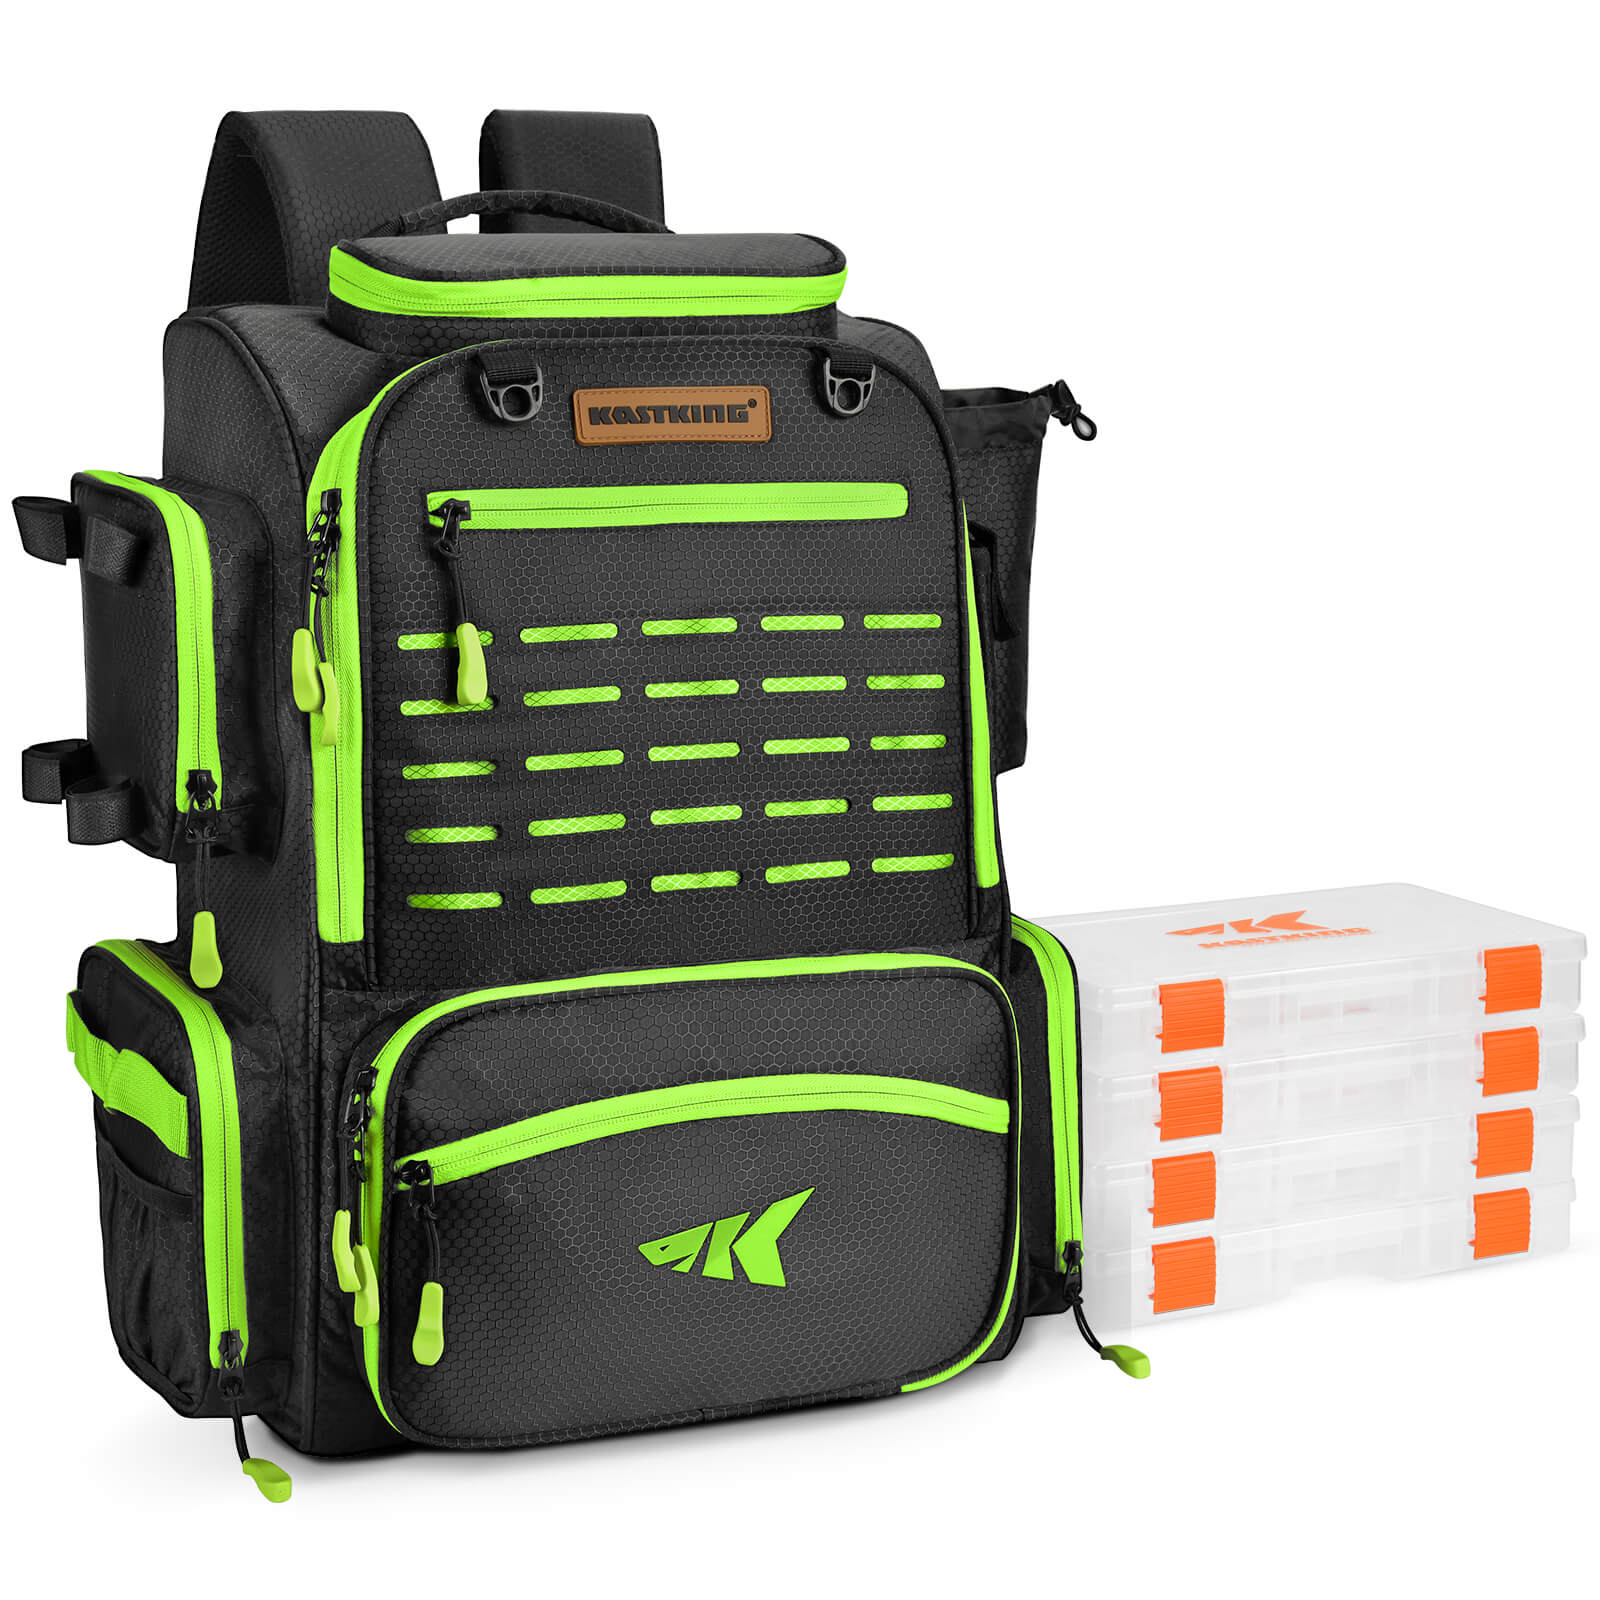 Backpacks are on sale for $59.99! Great tackle storage option for